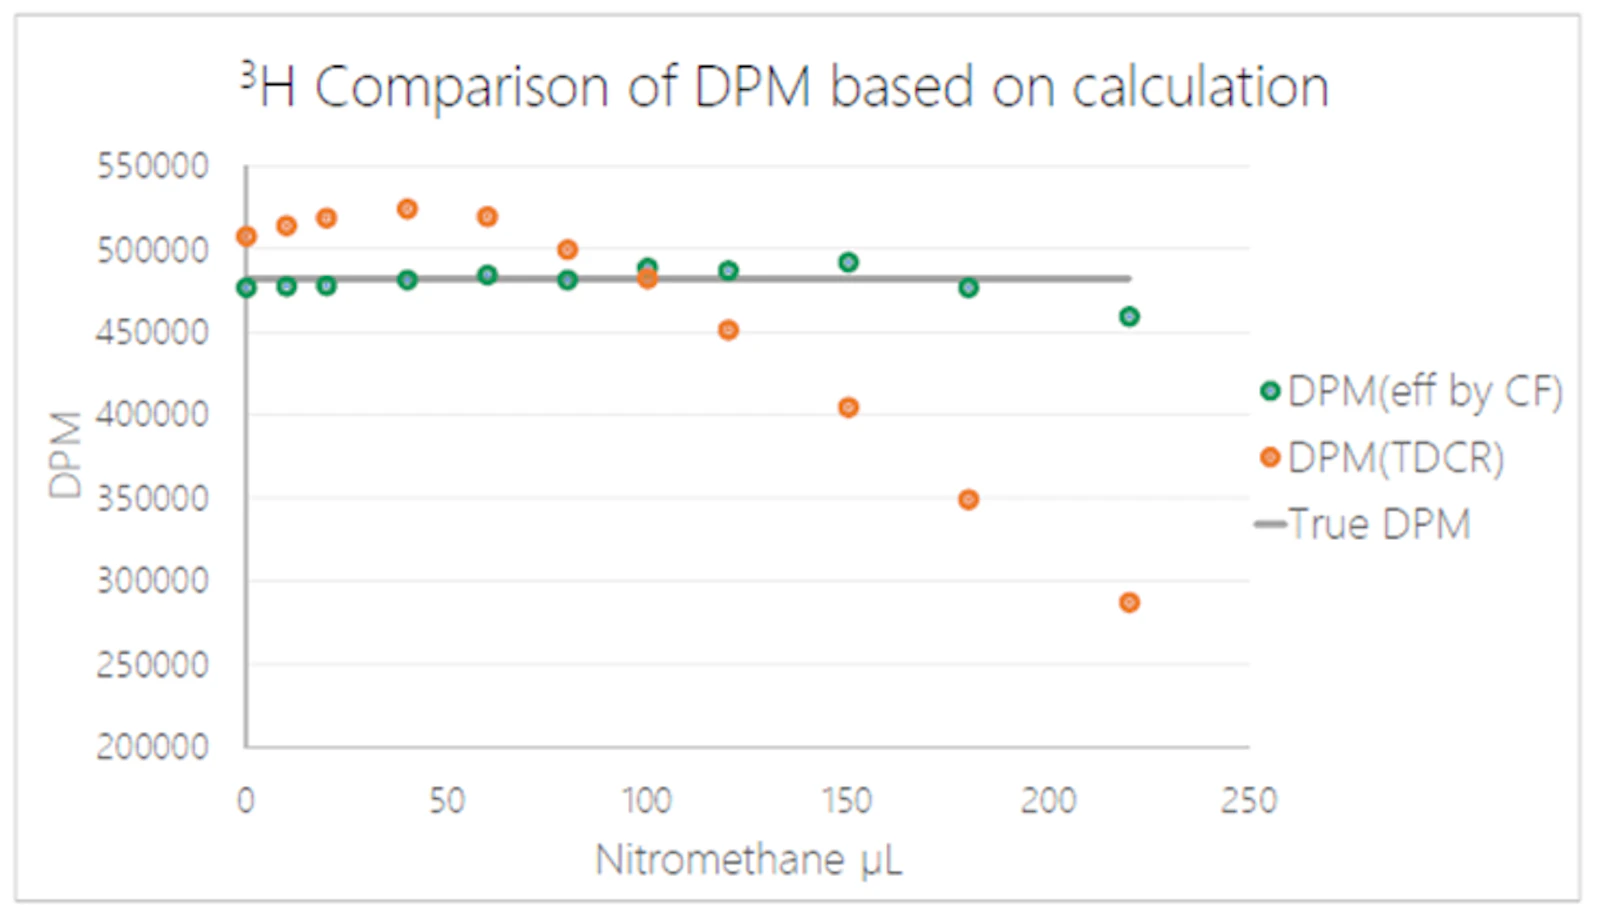 3H true DPM and values based on calculations, and TDCR calibration vs degree of quenching using nitromethane